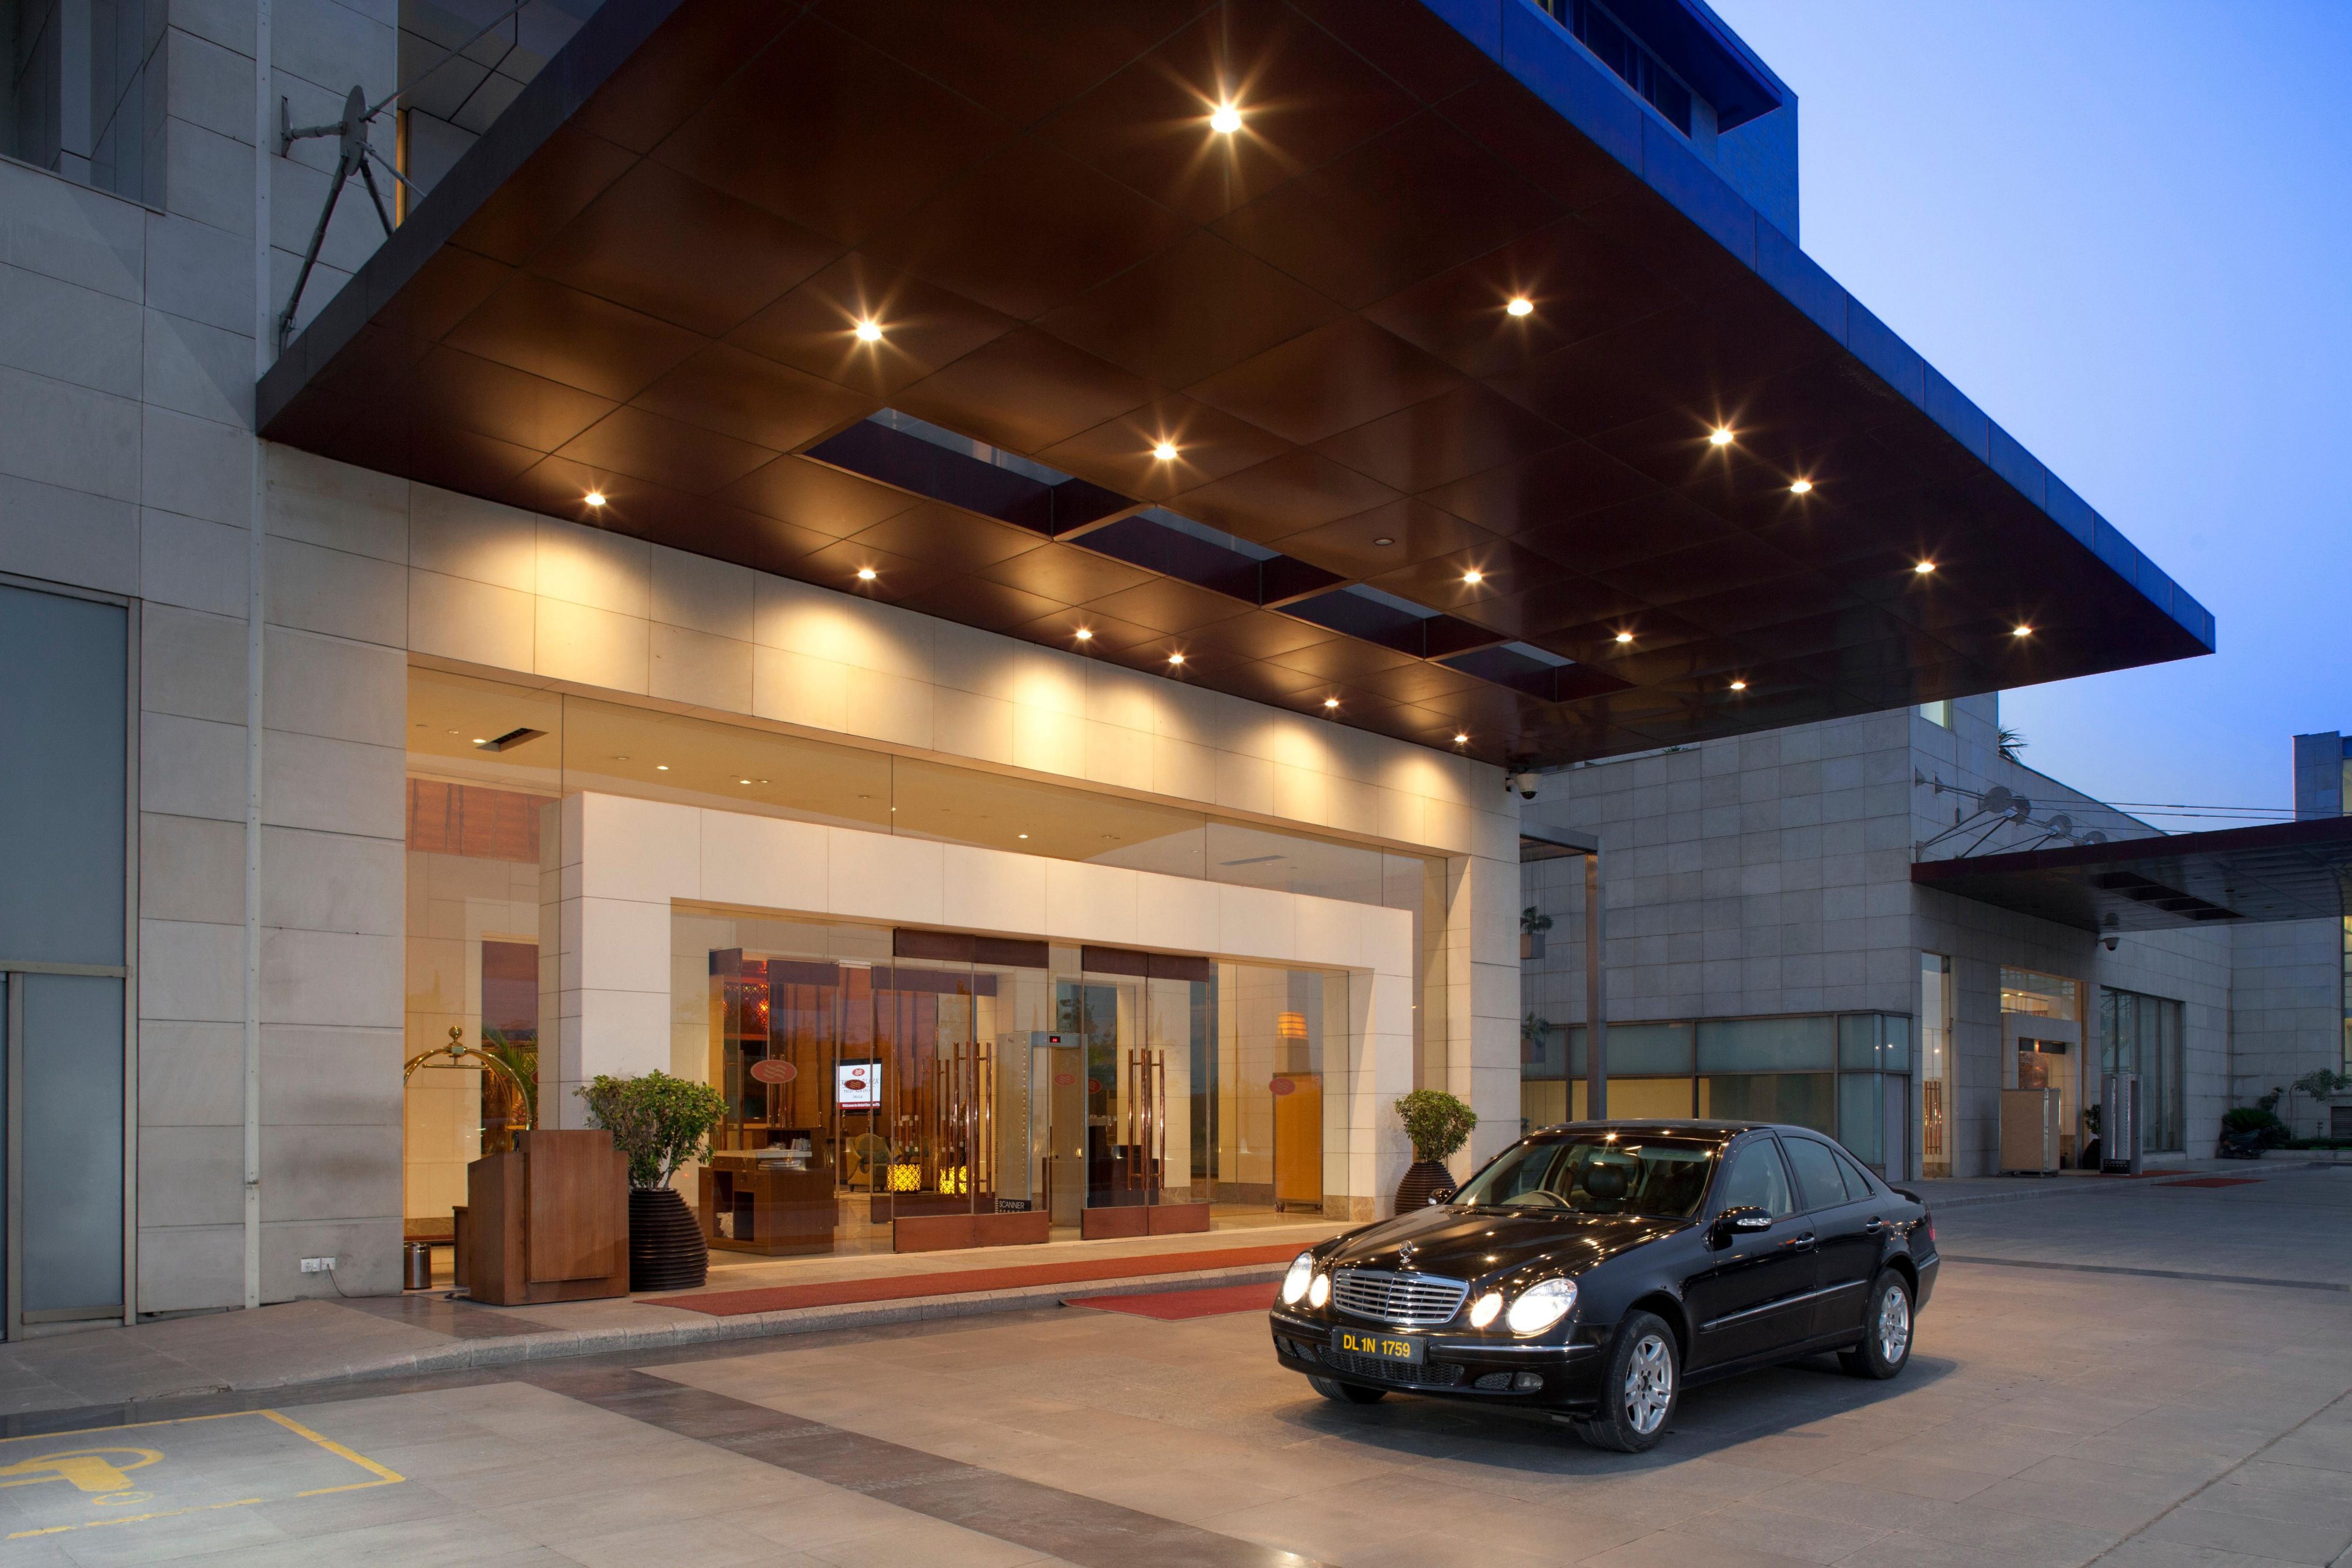 Feel the vibrant and classy ambience right from hotel entrance